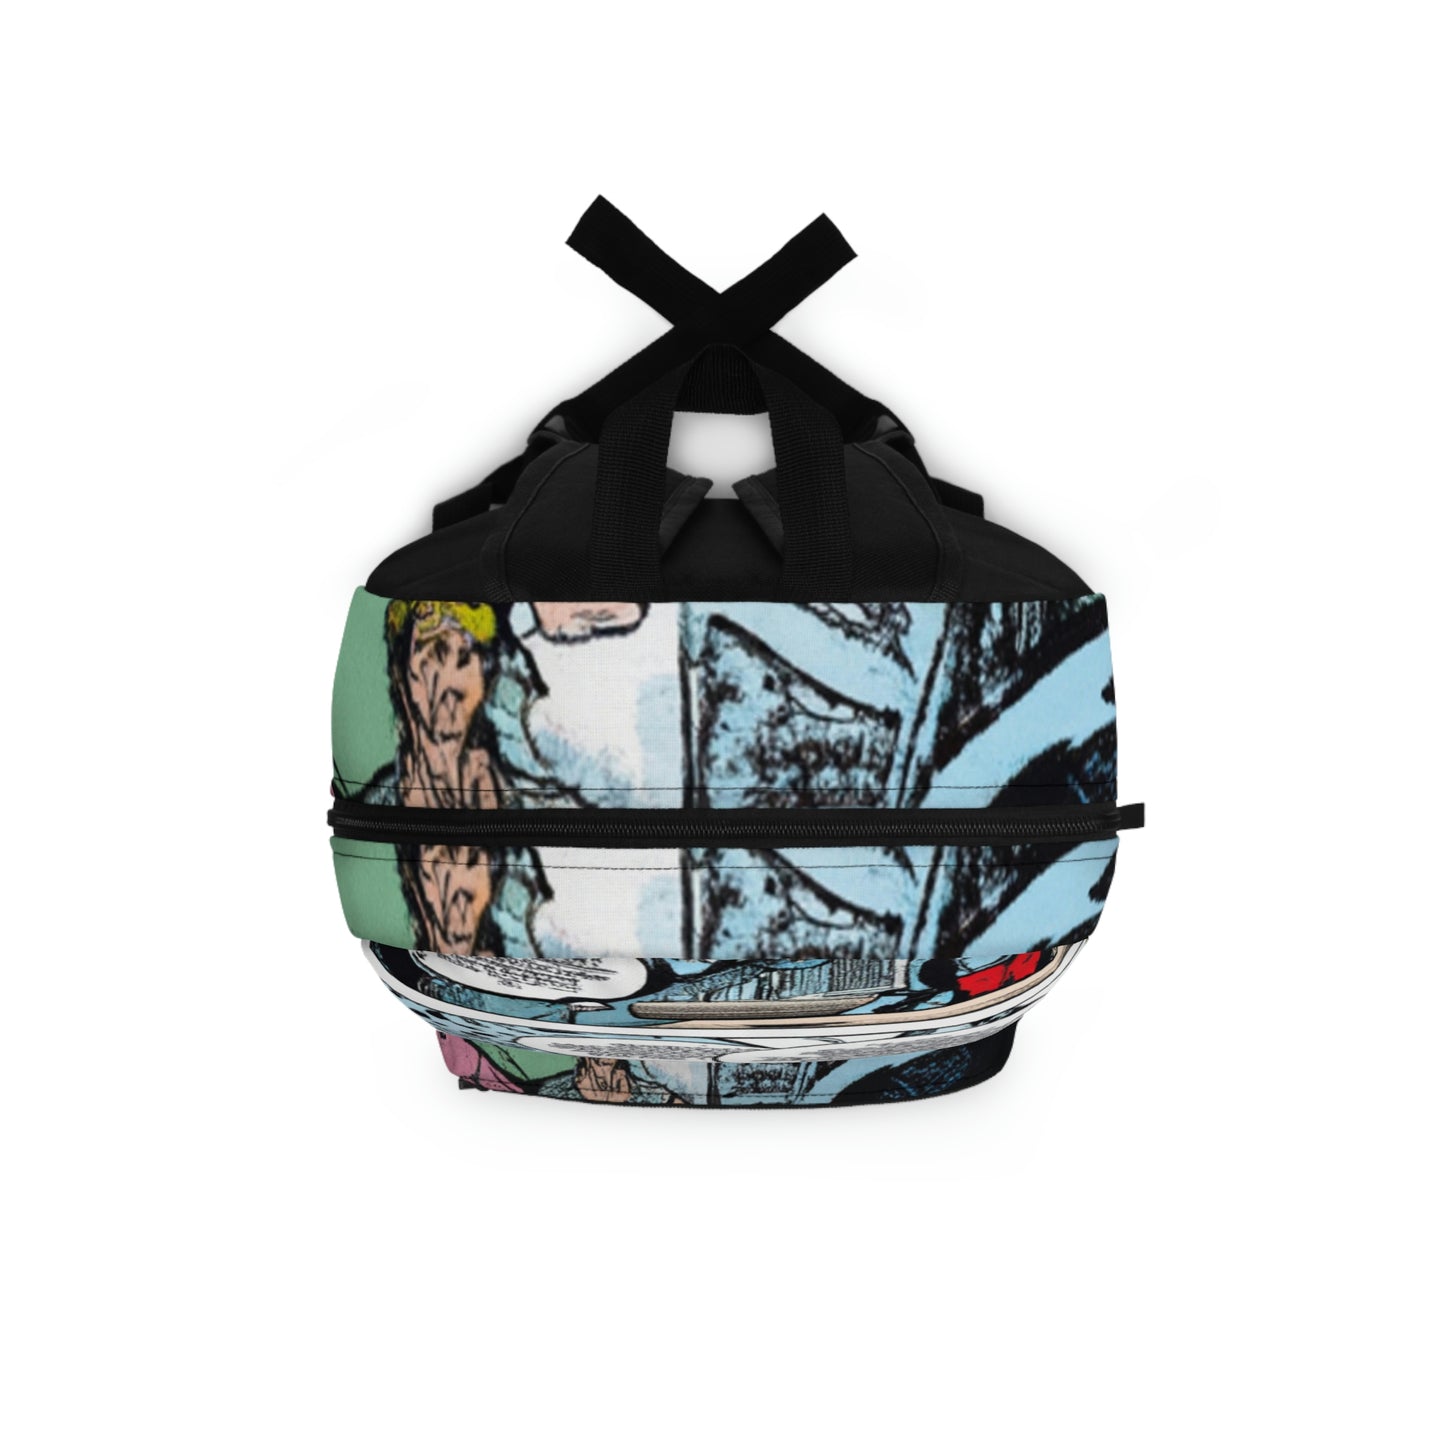 Captain Sparkz - Comic Book Backpack